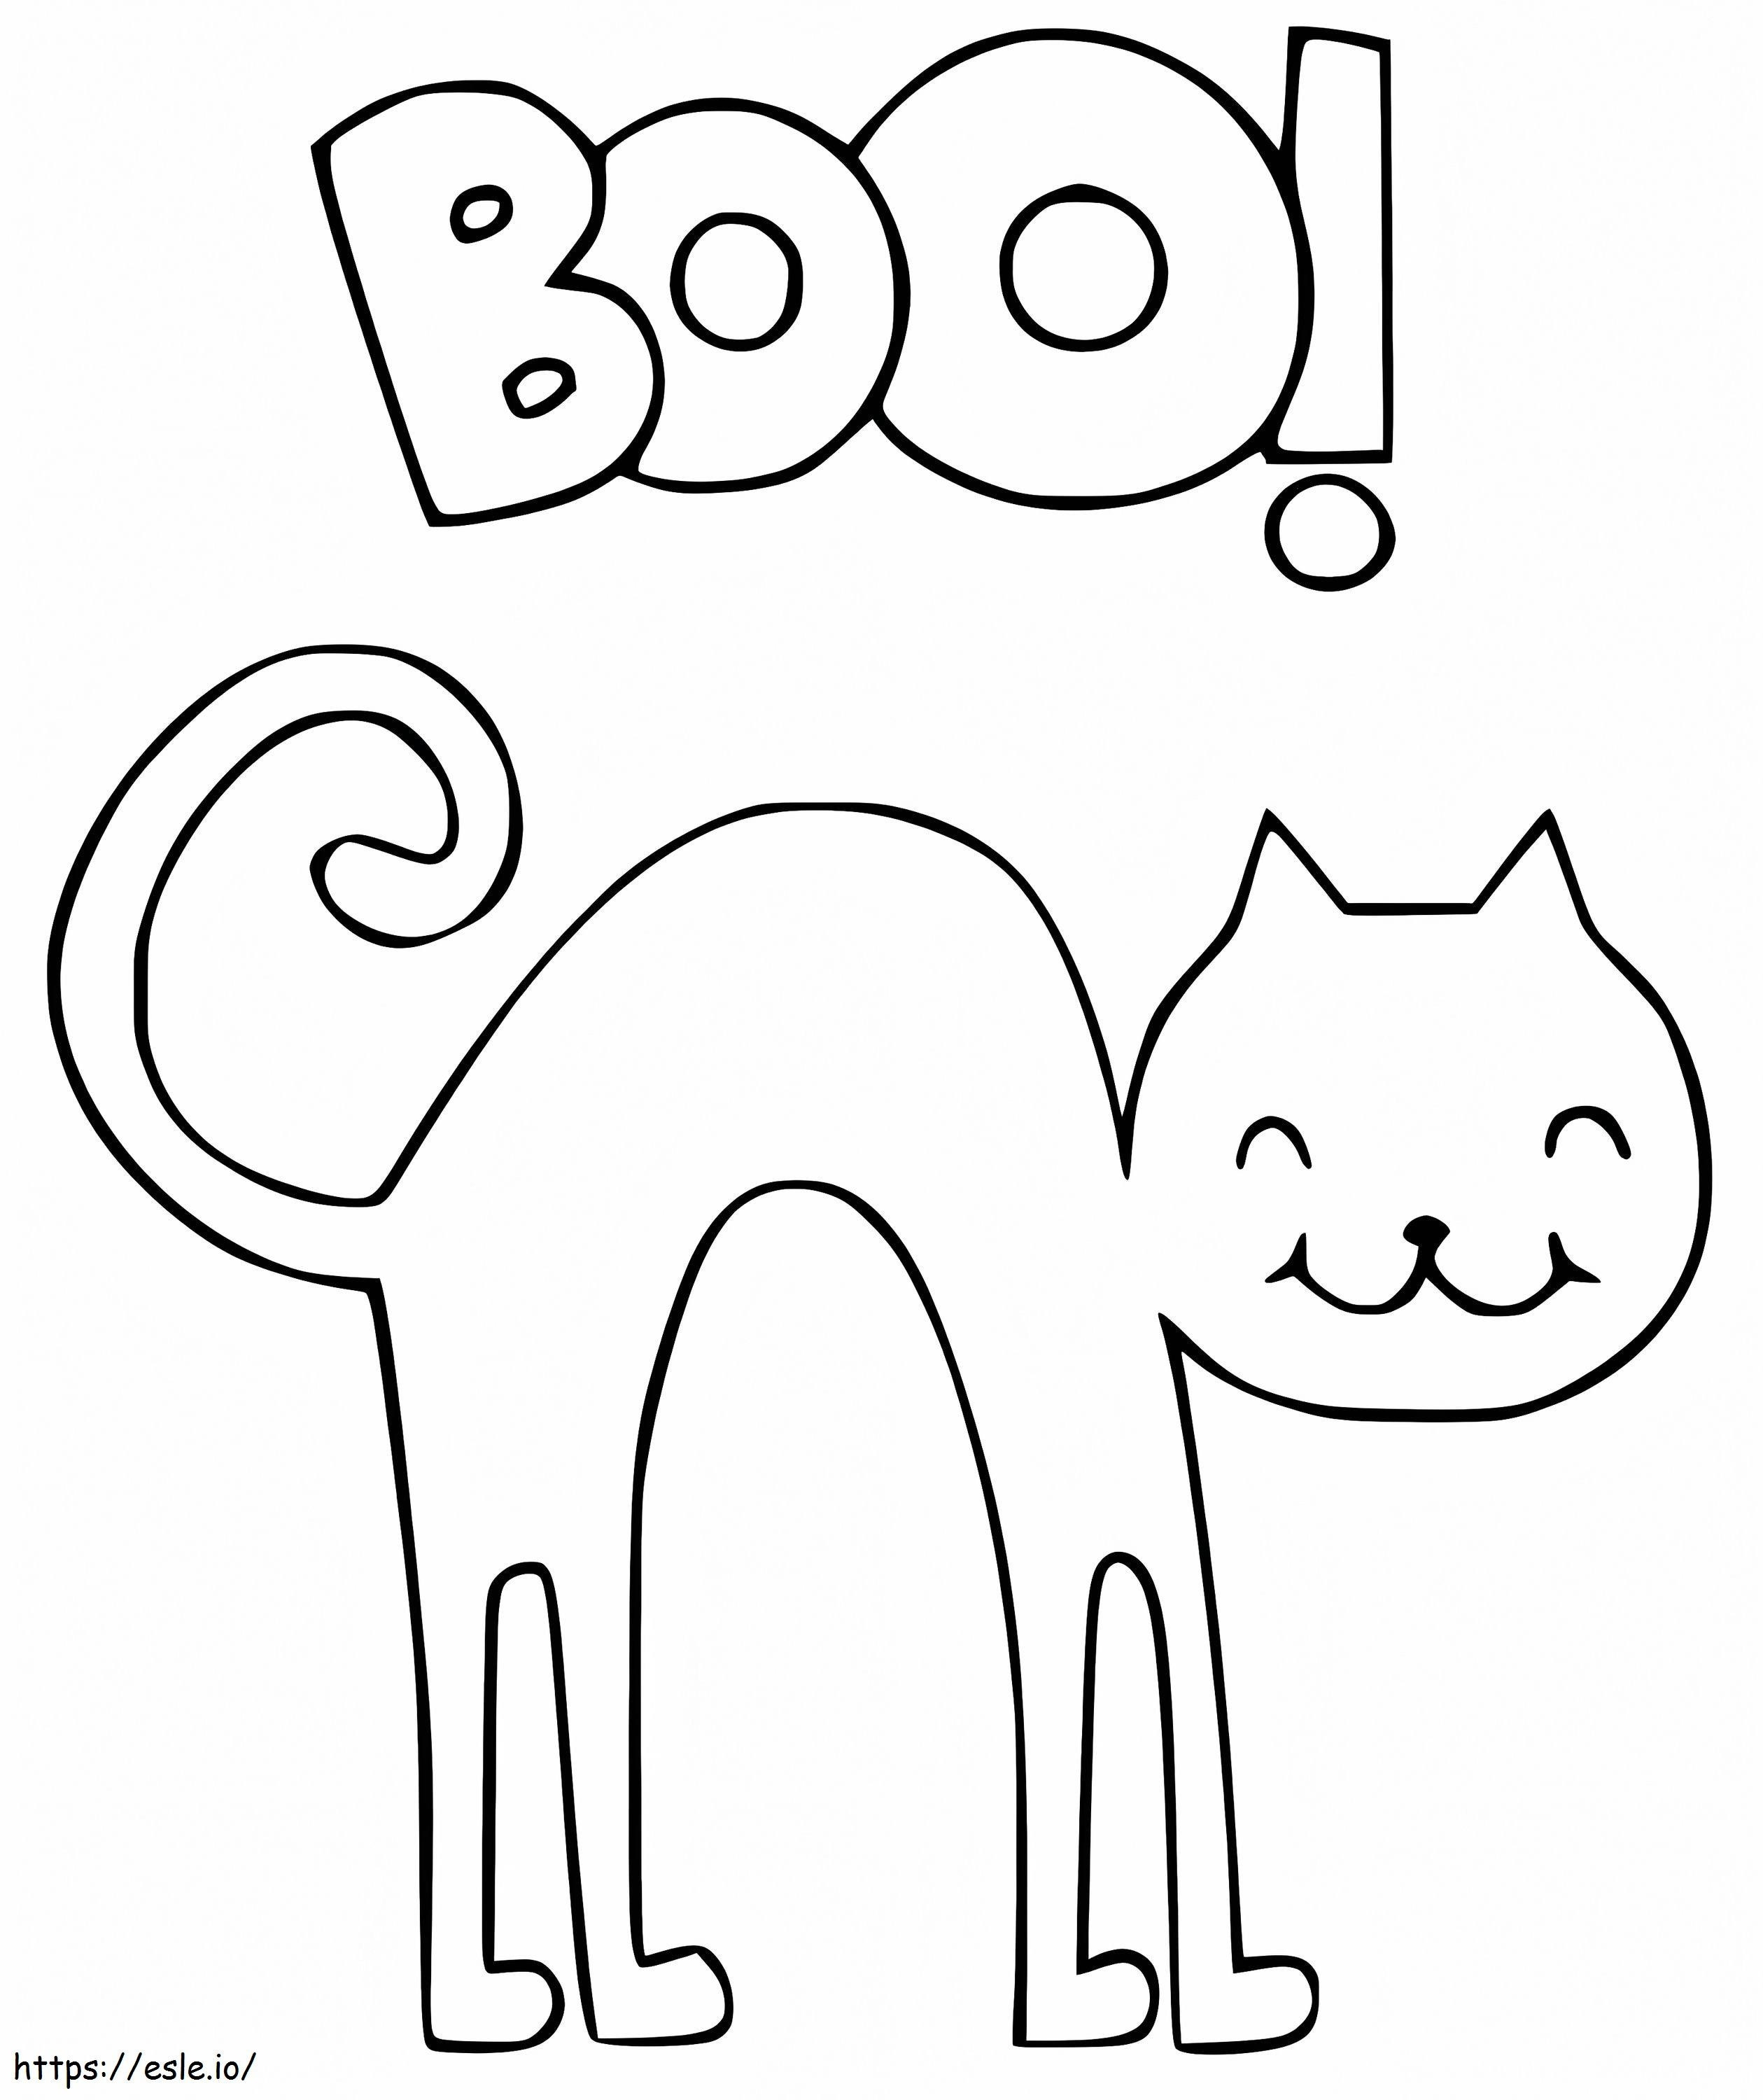 Halloween Cat Boo coloring page